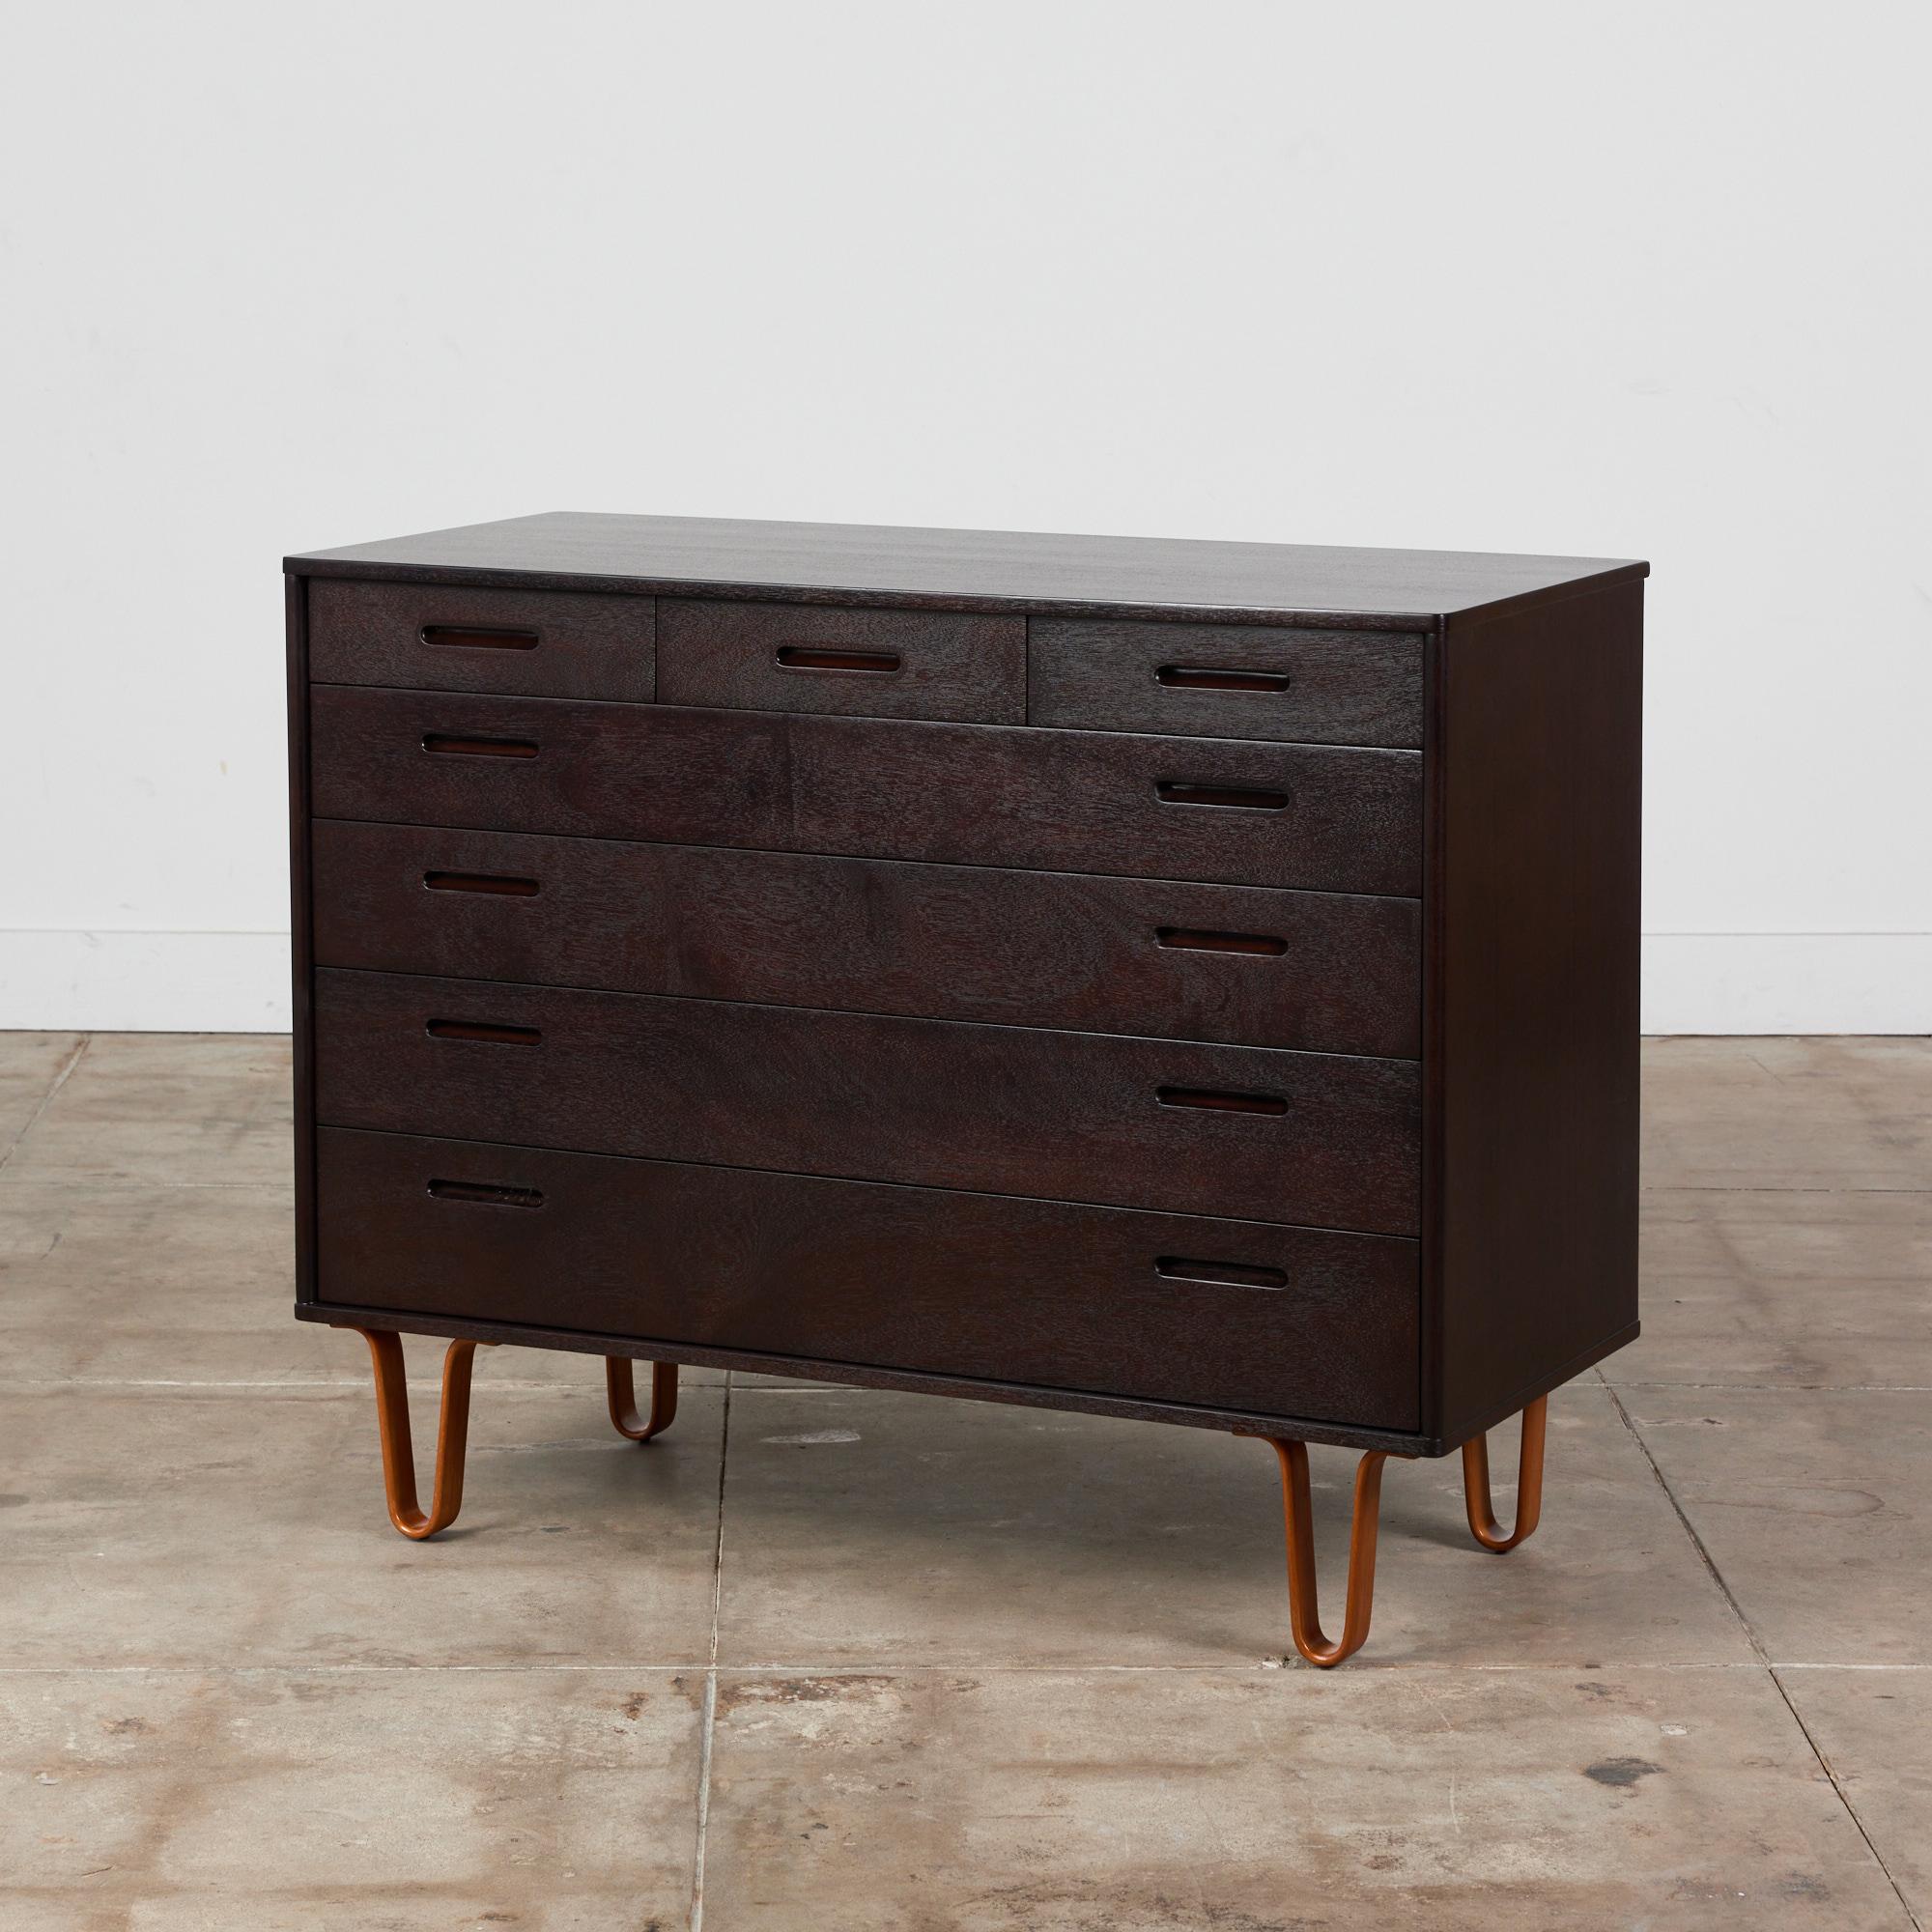 Edward Wormley for Dunbar, c.1970s, USA. The mahogany dresser has been newly refinished and ebonized. It features three smaller drawers along the top of the dresser and four full length draws below. The dresser is supported by four bent mahogany